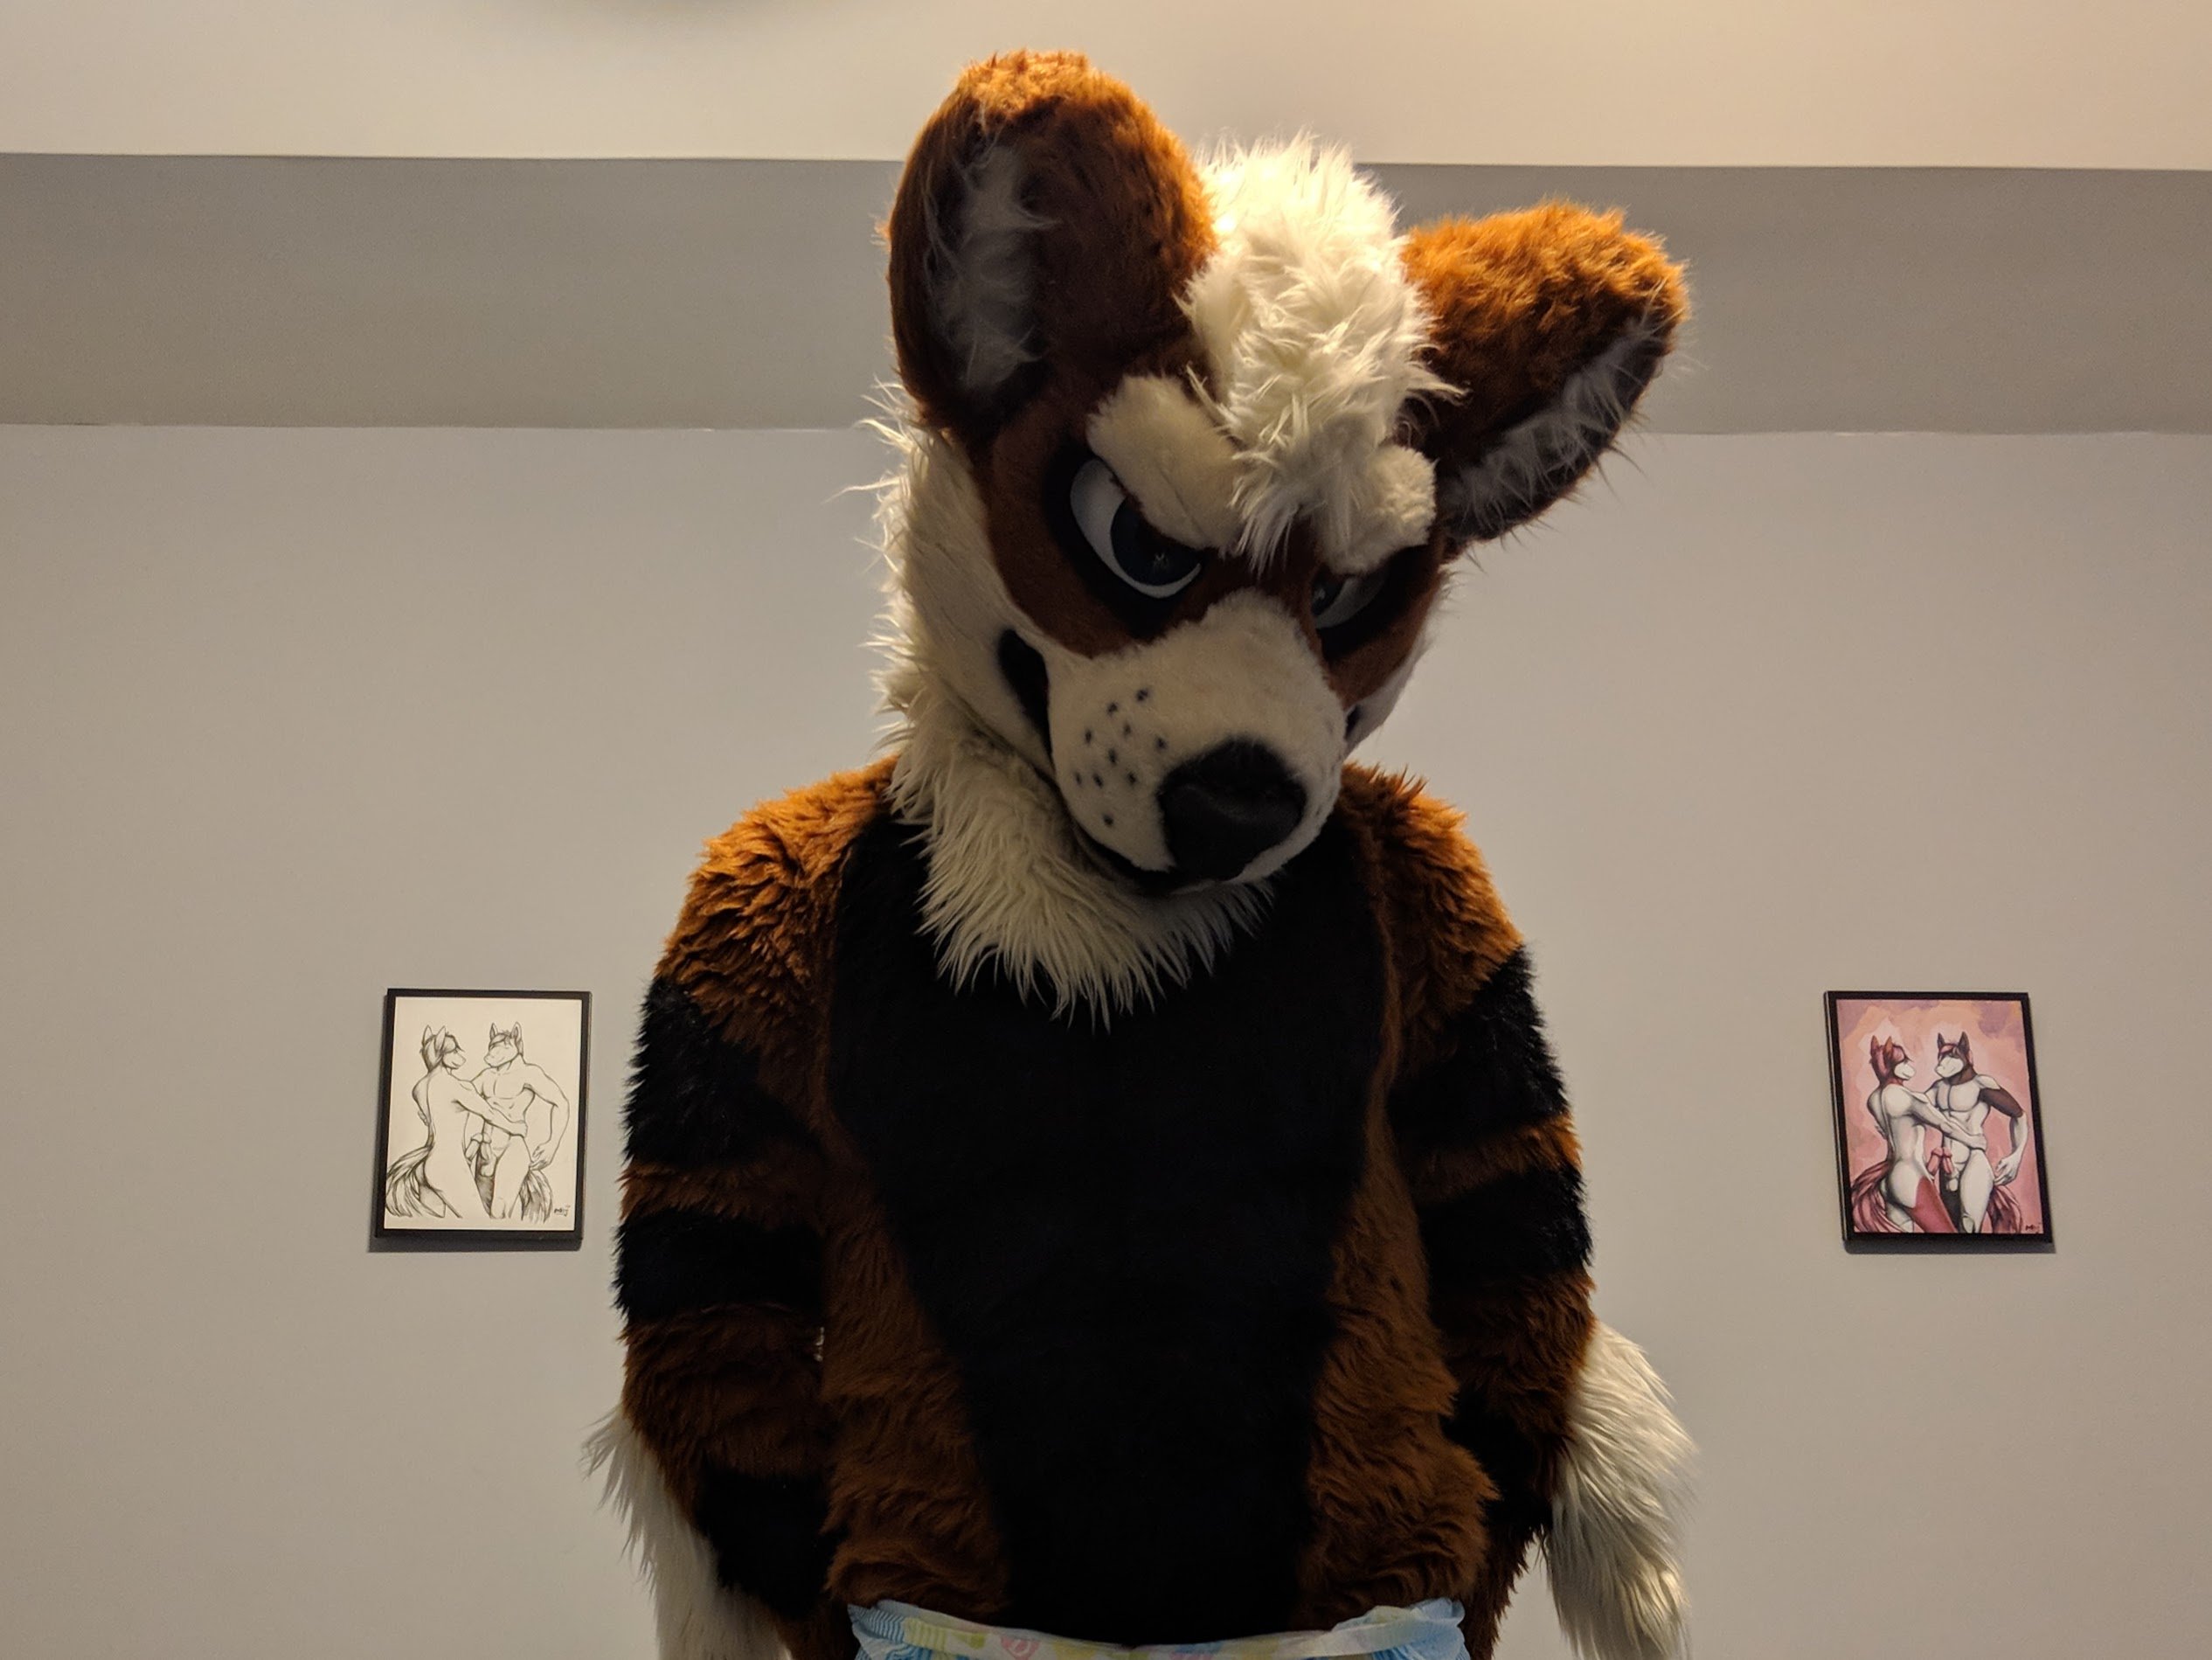 18+ NSFW sometimes Fursuit building, classic VW surgeon, moto riding, kinky, diapered, rubber, husky mutt drinker of beer TG link https://t.co/l6gzfrvl8X